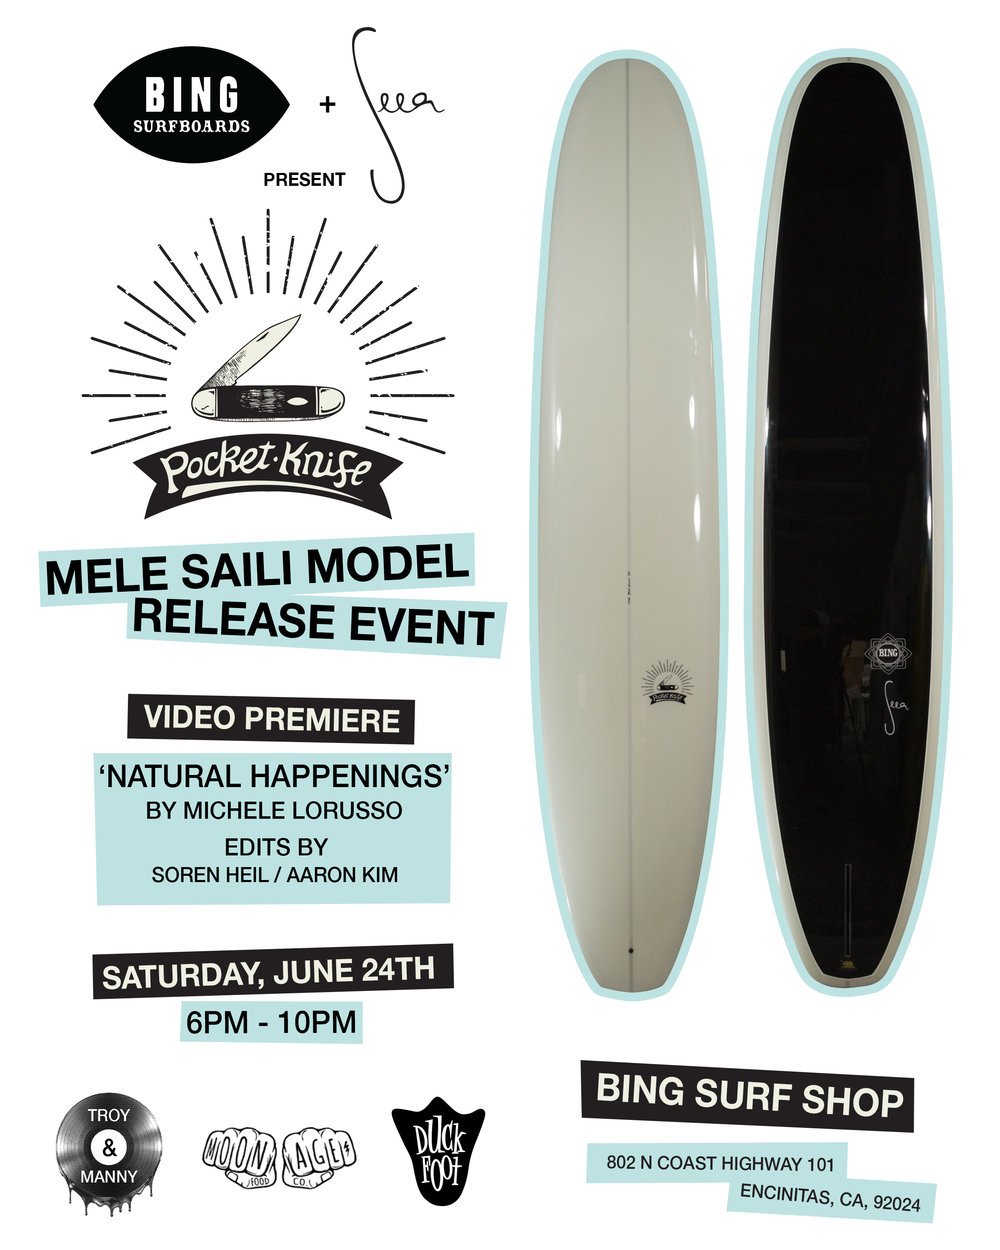 Pocket Knife / Mele Saili Model Release Event this Saturday, June 24th